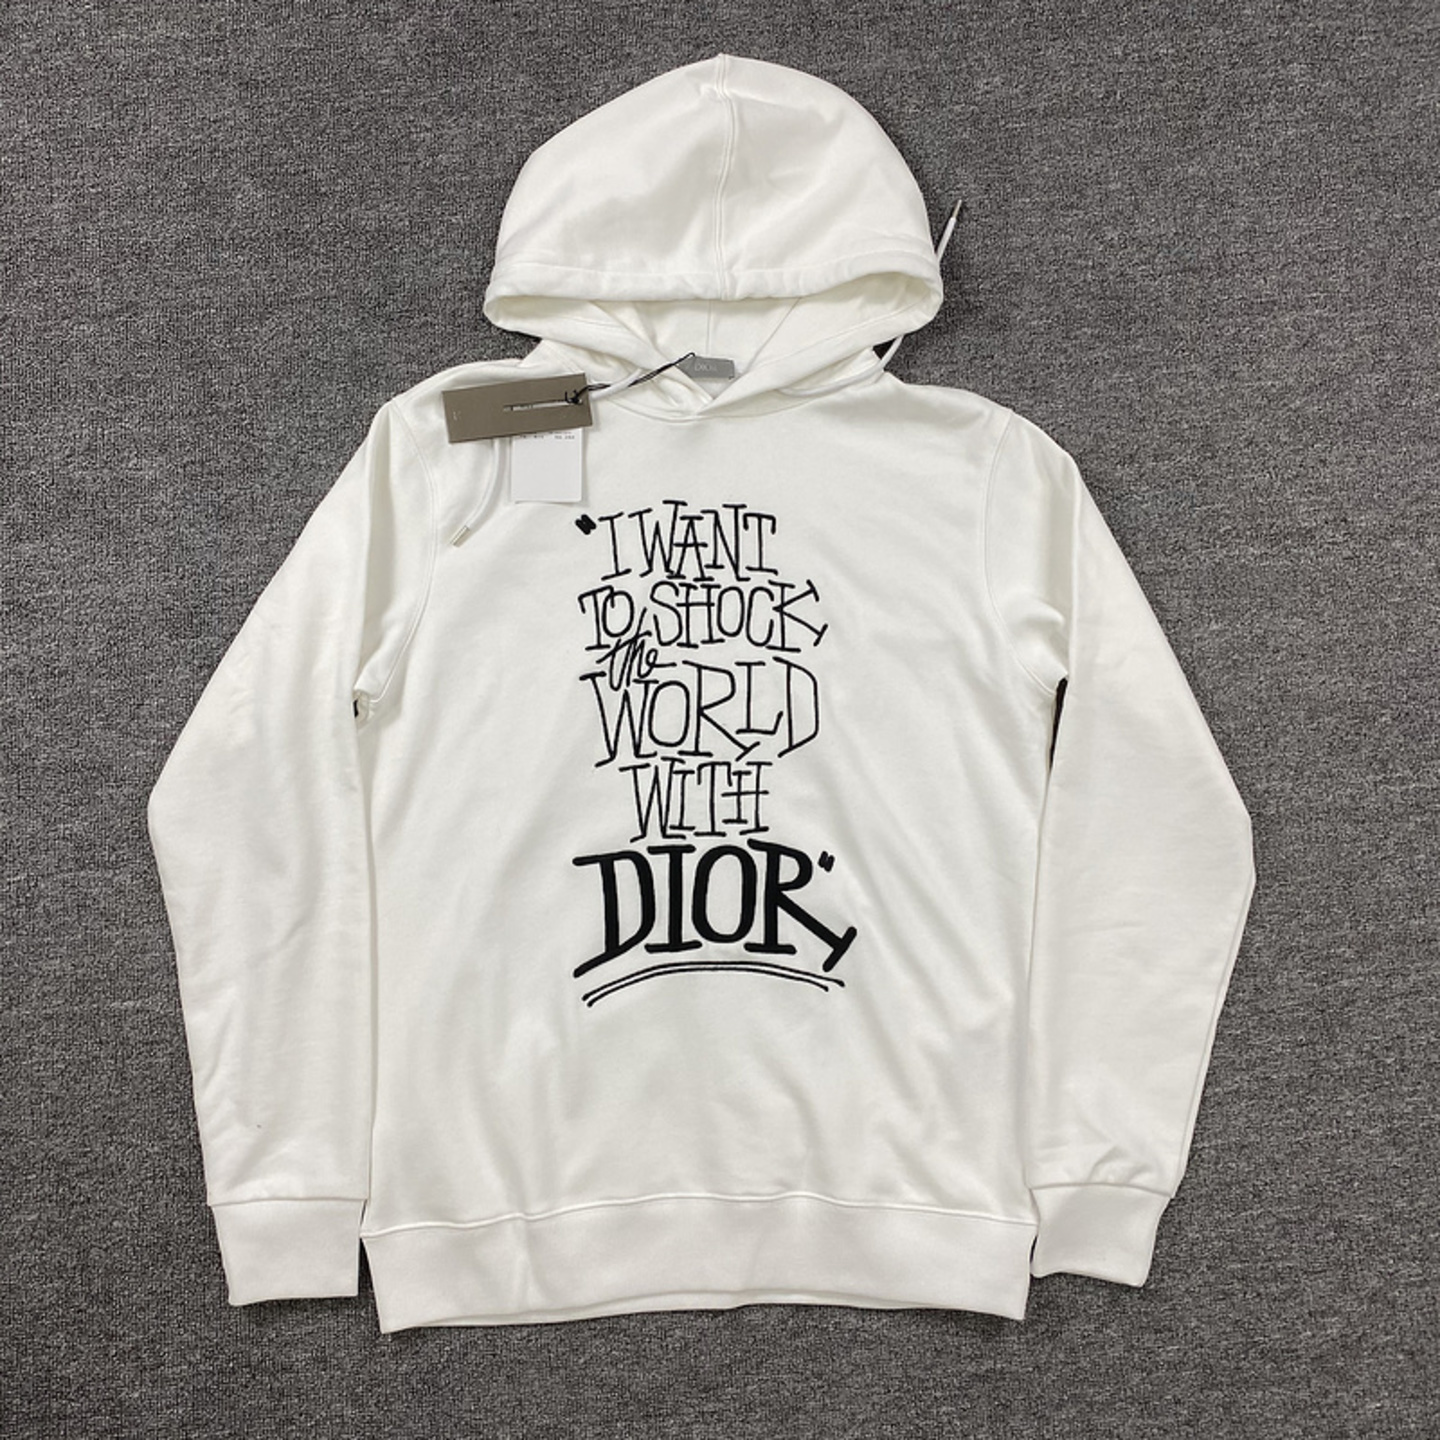 Dior and Shawn Oversized Hoodie